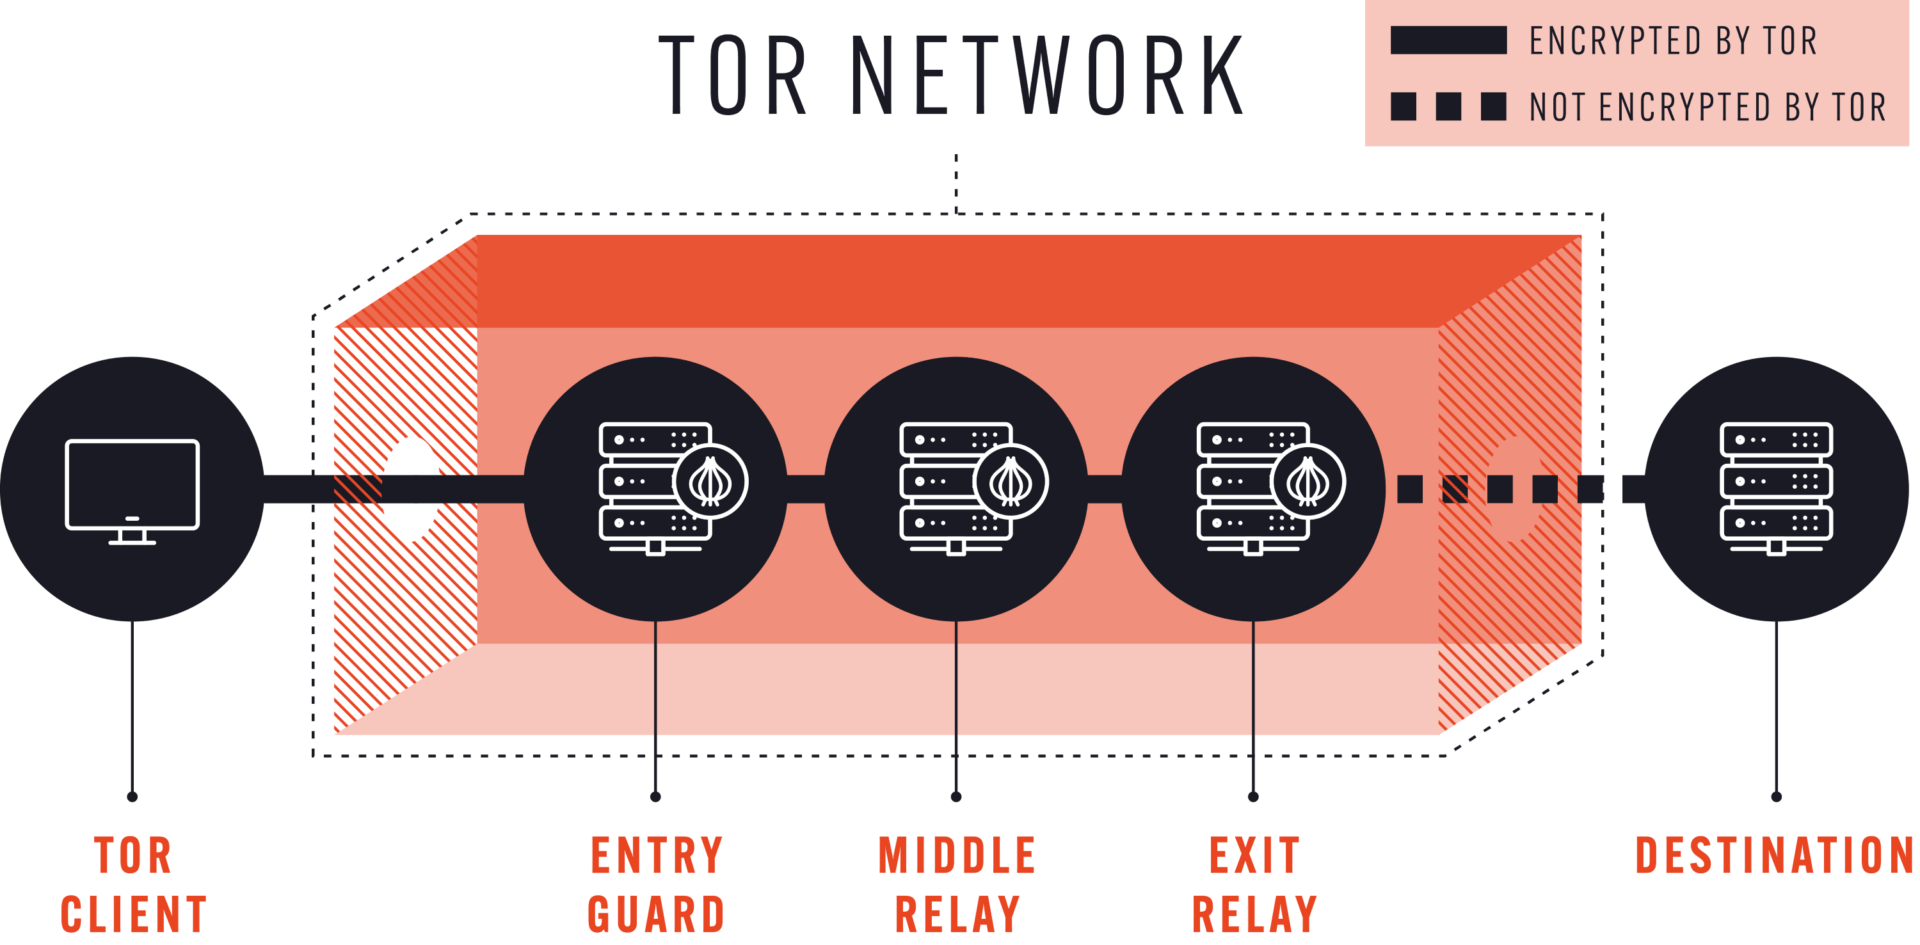 Tor works on onion routing - where your message is routed through several nodes before reaching it’s target. No one node knows the full picture.